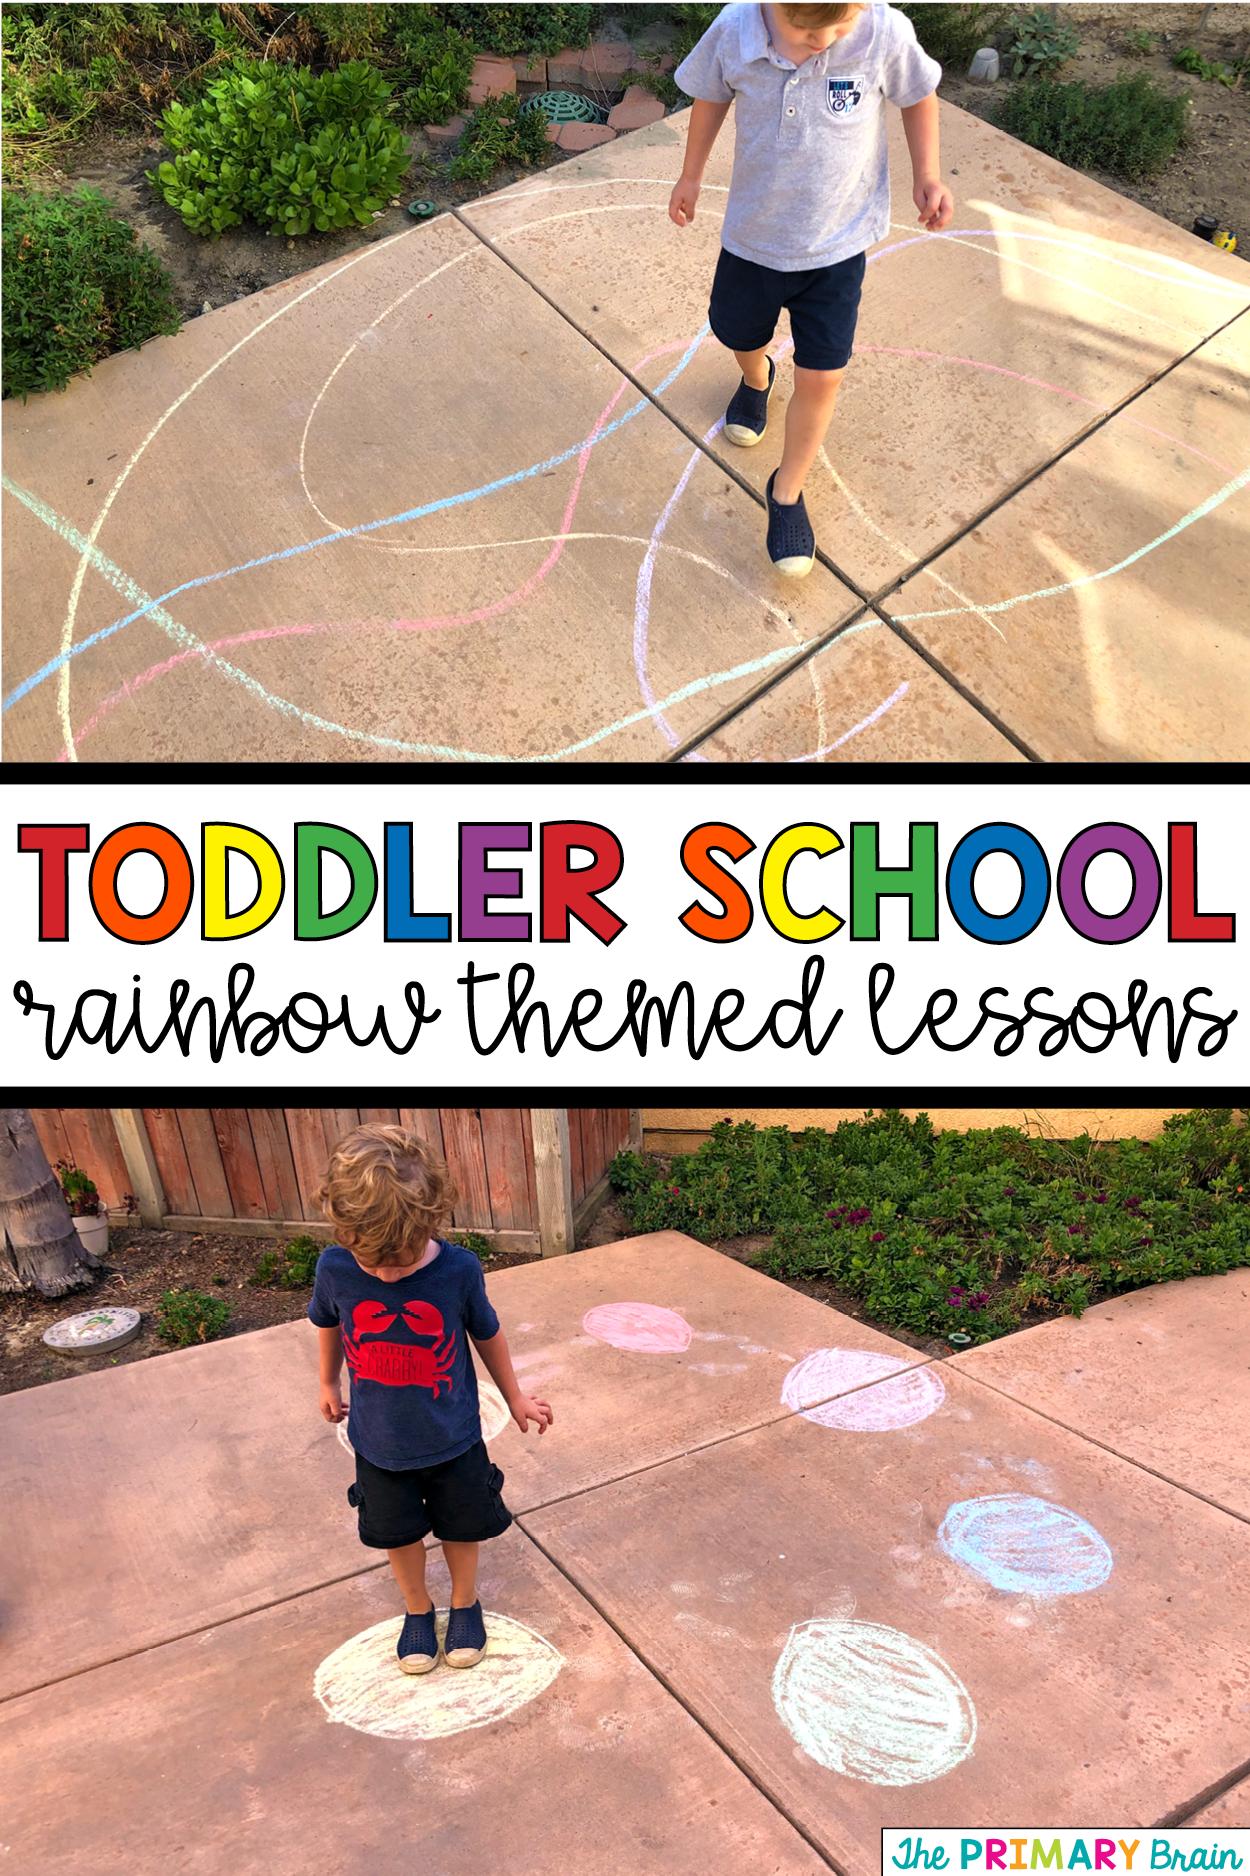 Toddler Lesson Plans - Rainbow Themed Lessons | The Primary